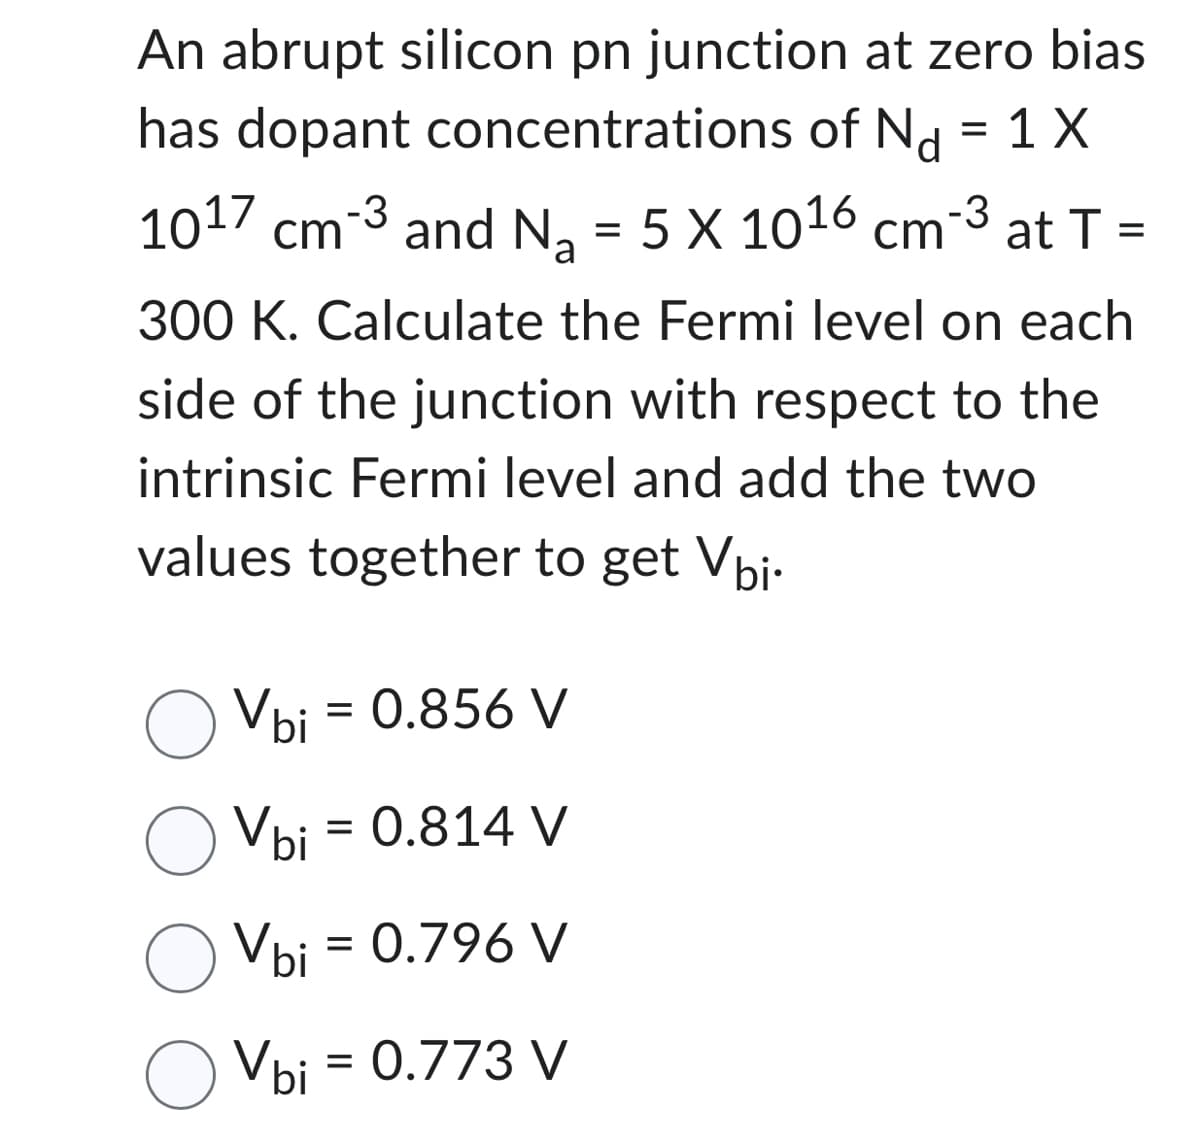 An abrupt silicon pn junction at zero bias
has dopant concentrations of Nd = 1 X
-3
10¹7 cm-³ and N₂ = 5 X 10¹6 cm-³ at T =
a
300 K. Calculate the Fermi level on each
side of the junction with respect to the
intrinsic Fermi level and add the two
values together to get Vbi.
Vbi = 0.856 V
O Vbi
Vbi = 0.814 V
Vbi = 0.796 V
Vbi = 0.773 V
o Vbi